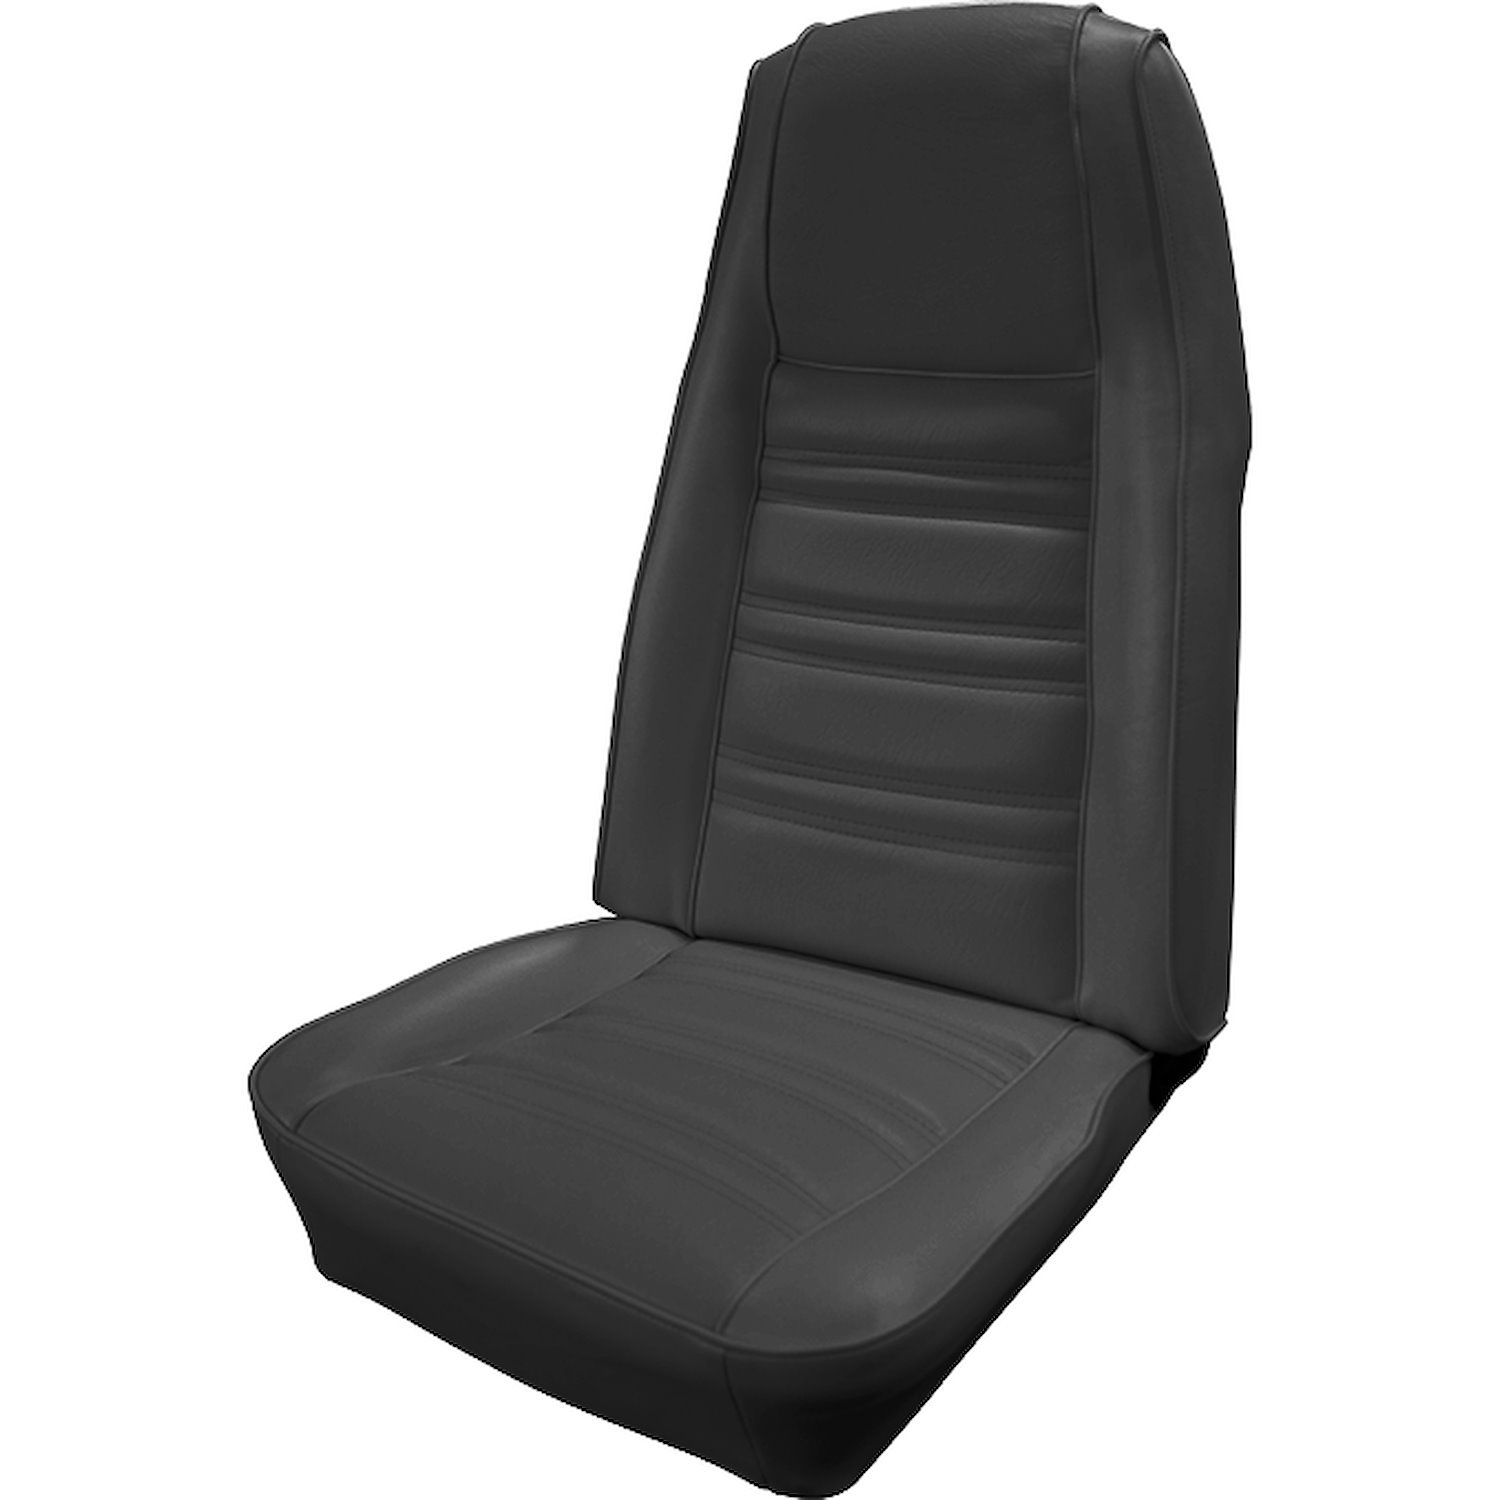 1970 Ford Mustang Sports-Roof Standard Interior Front Bucket and Rear Bench Seat Upholstery Set